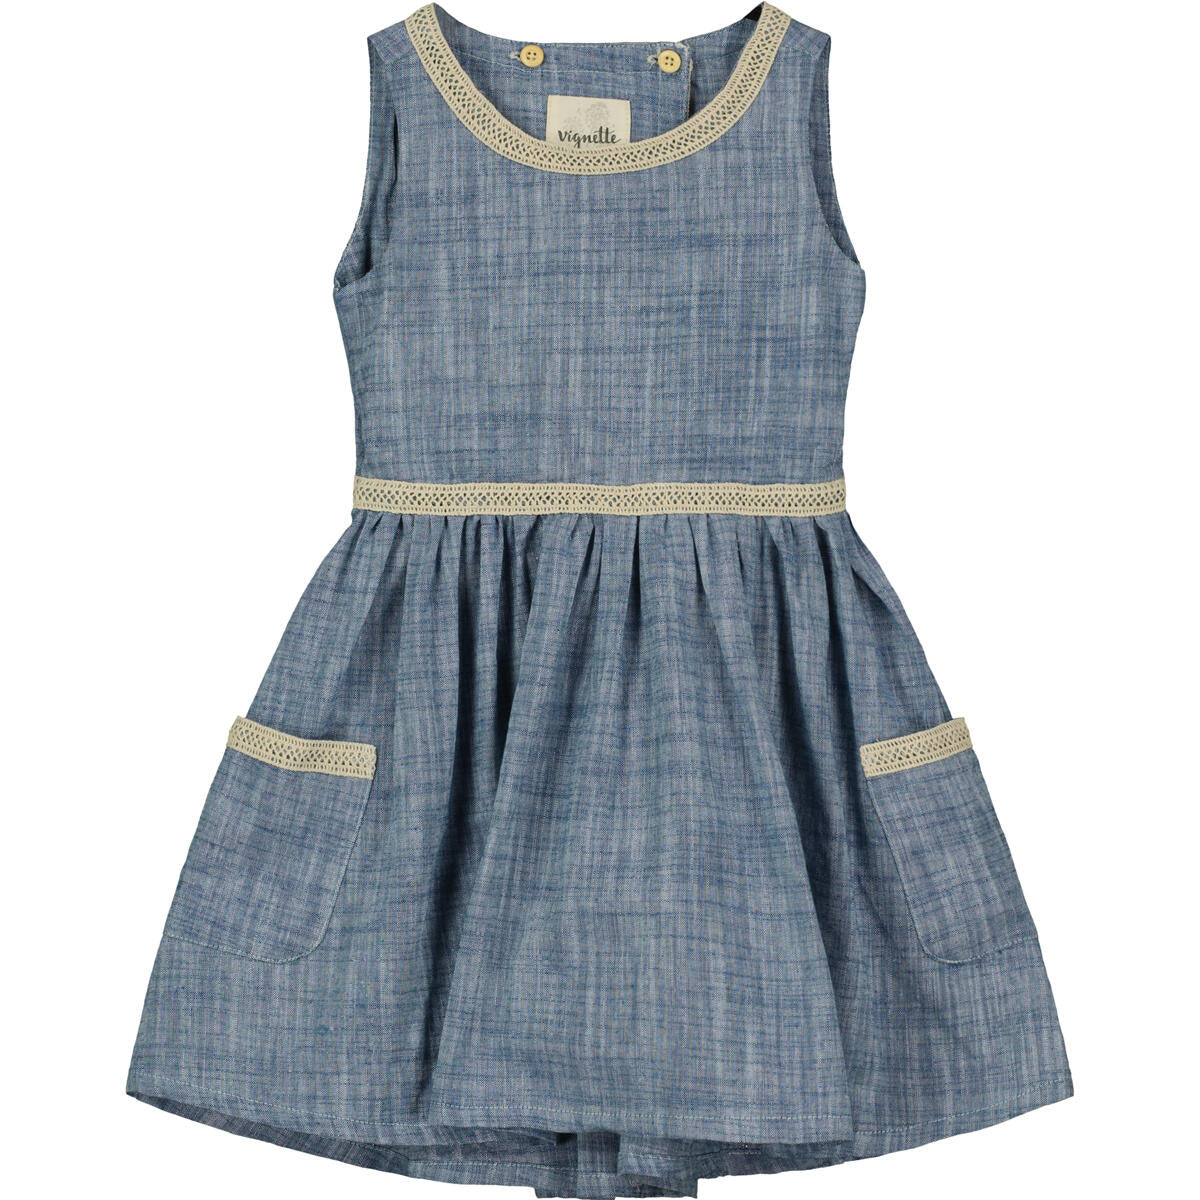 Nina Dress in Chambray Blue with Crochet Trim